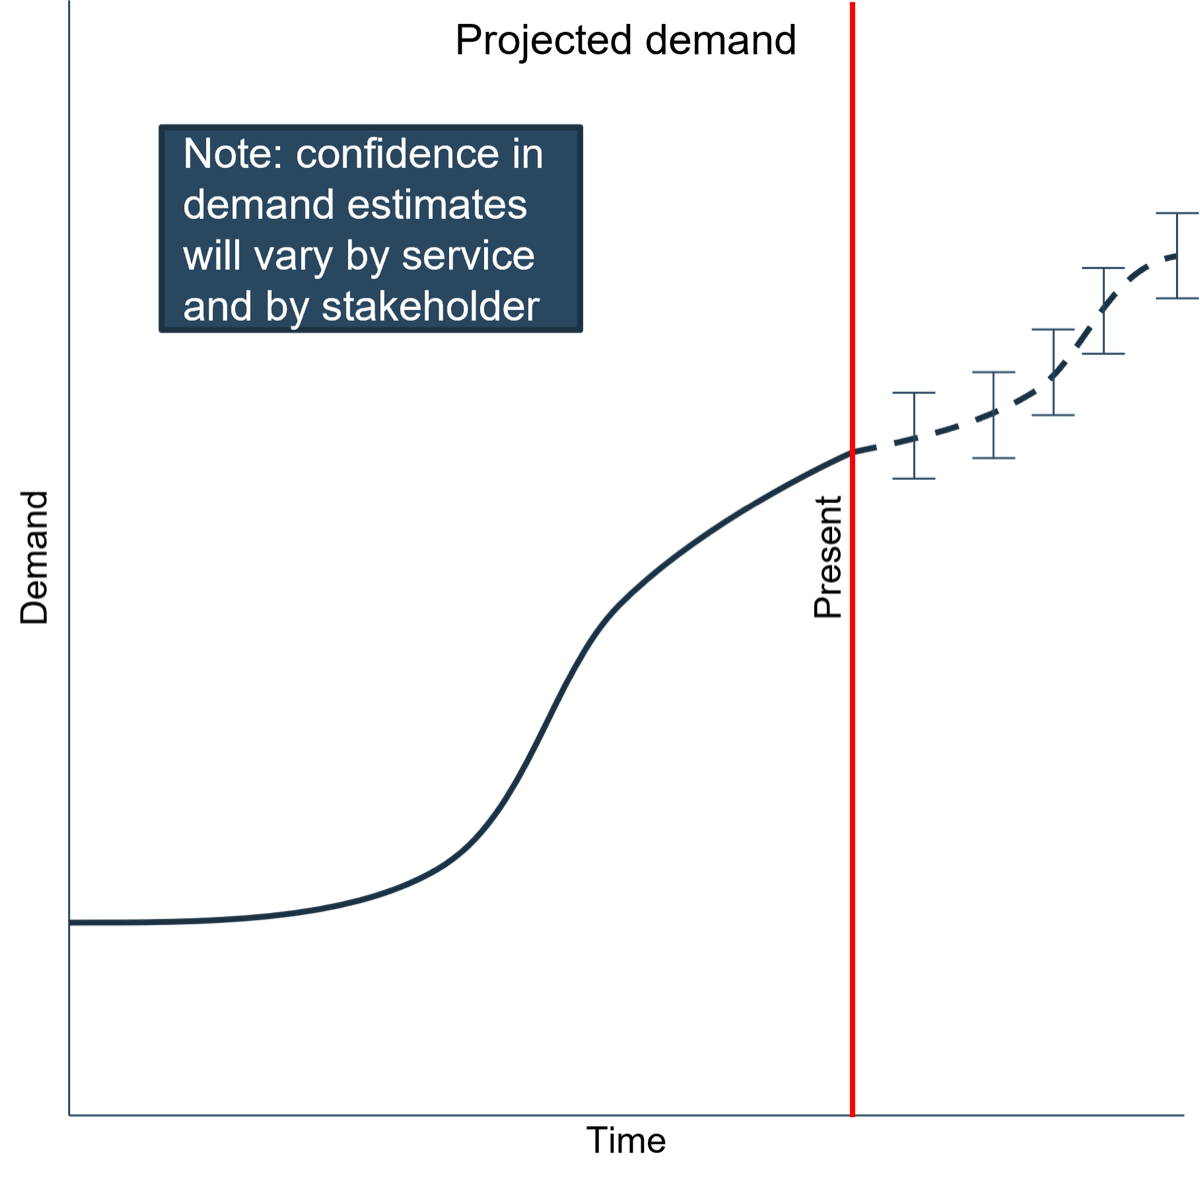 The image contains a graph that is labelled: Projected demand, and graphs demand over time. There is a curved line that passes through a vertical line labelled present. There is a box on top of the graph that contains the text: Note: confidence in demand estimates will very by service and by stakeholder.